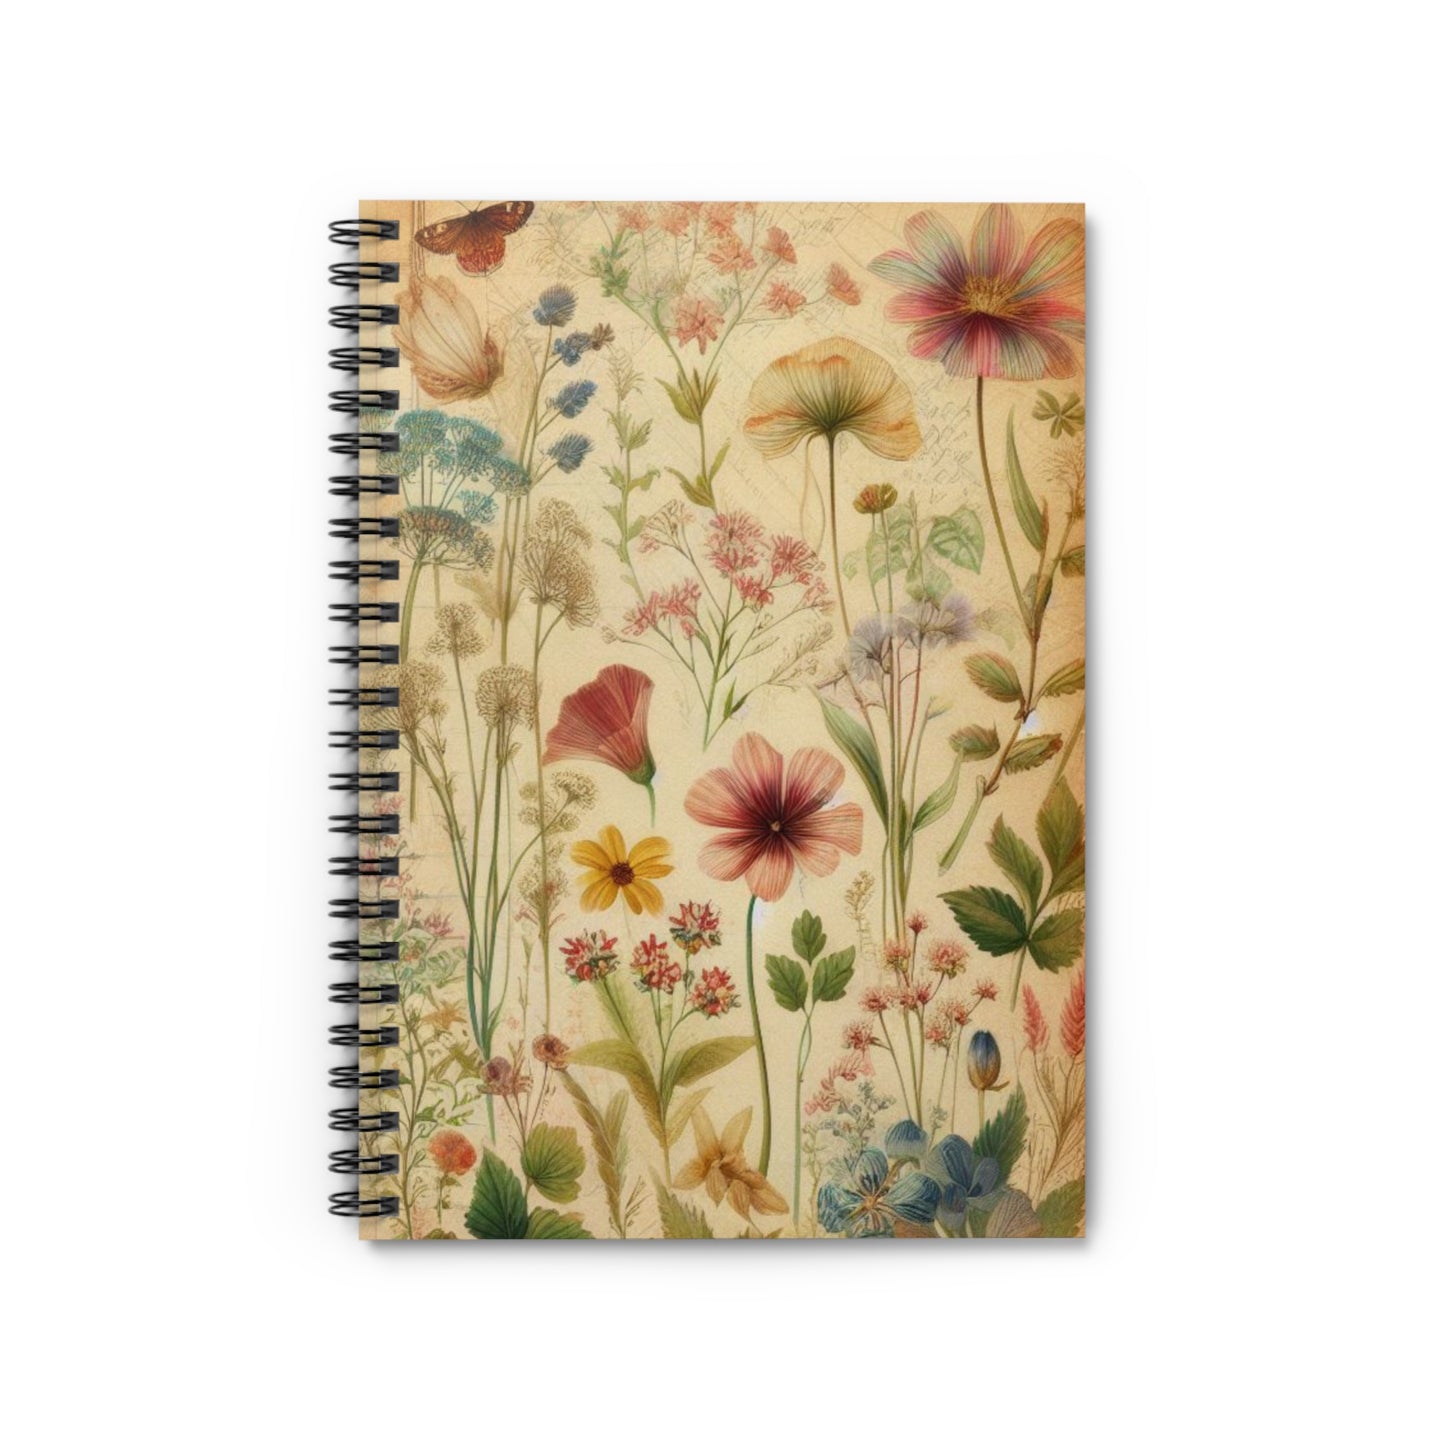 Vintage Aged Paper Floral Flowers Aesthetic Spiral Notebook Ruled Line Journal